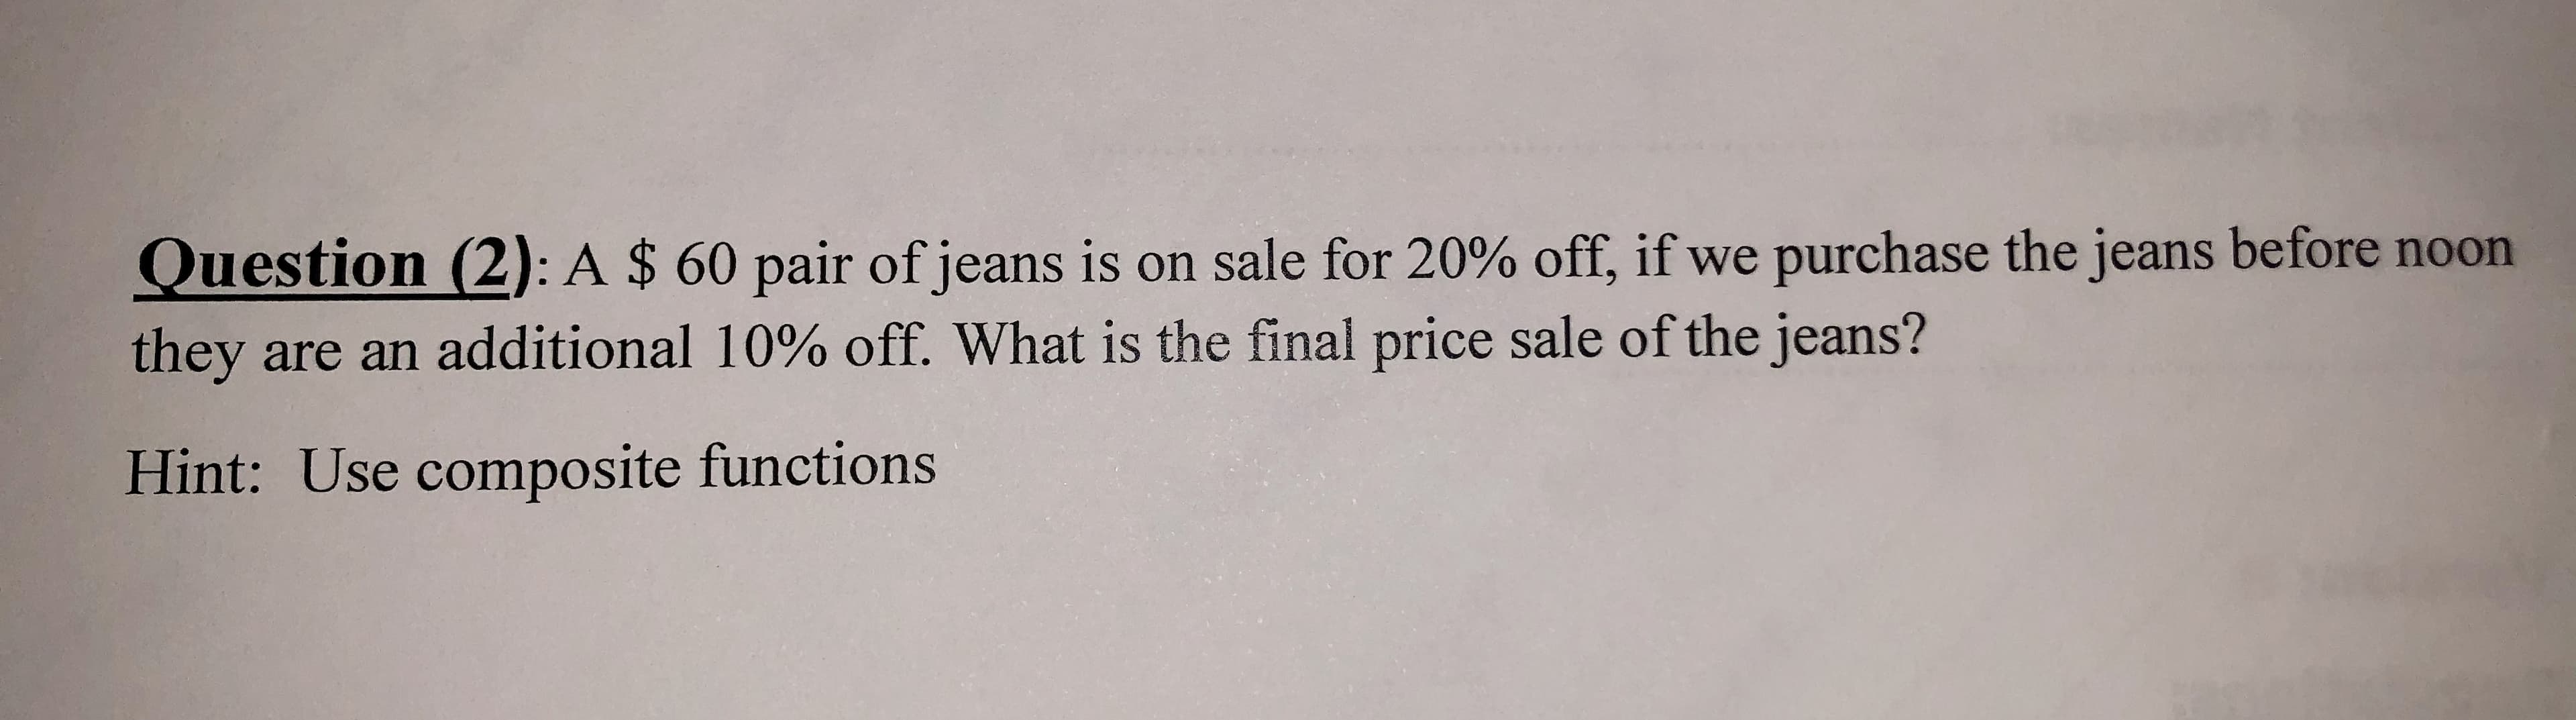 Question (2): A $ 60 pair of jeans is on sale for 20% off, if we purchase the jeans before noon
they are an additional 10% off. What is the final price sale of the jeans?
Hint: Use composite functions
